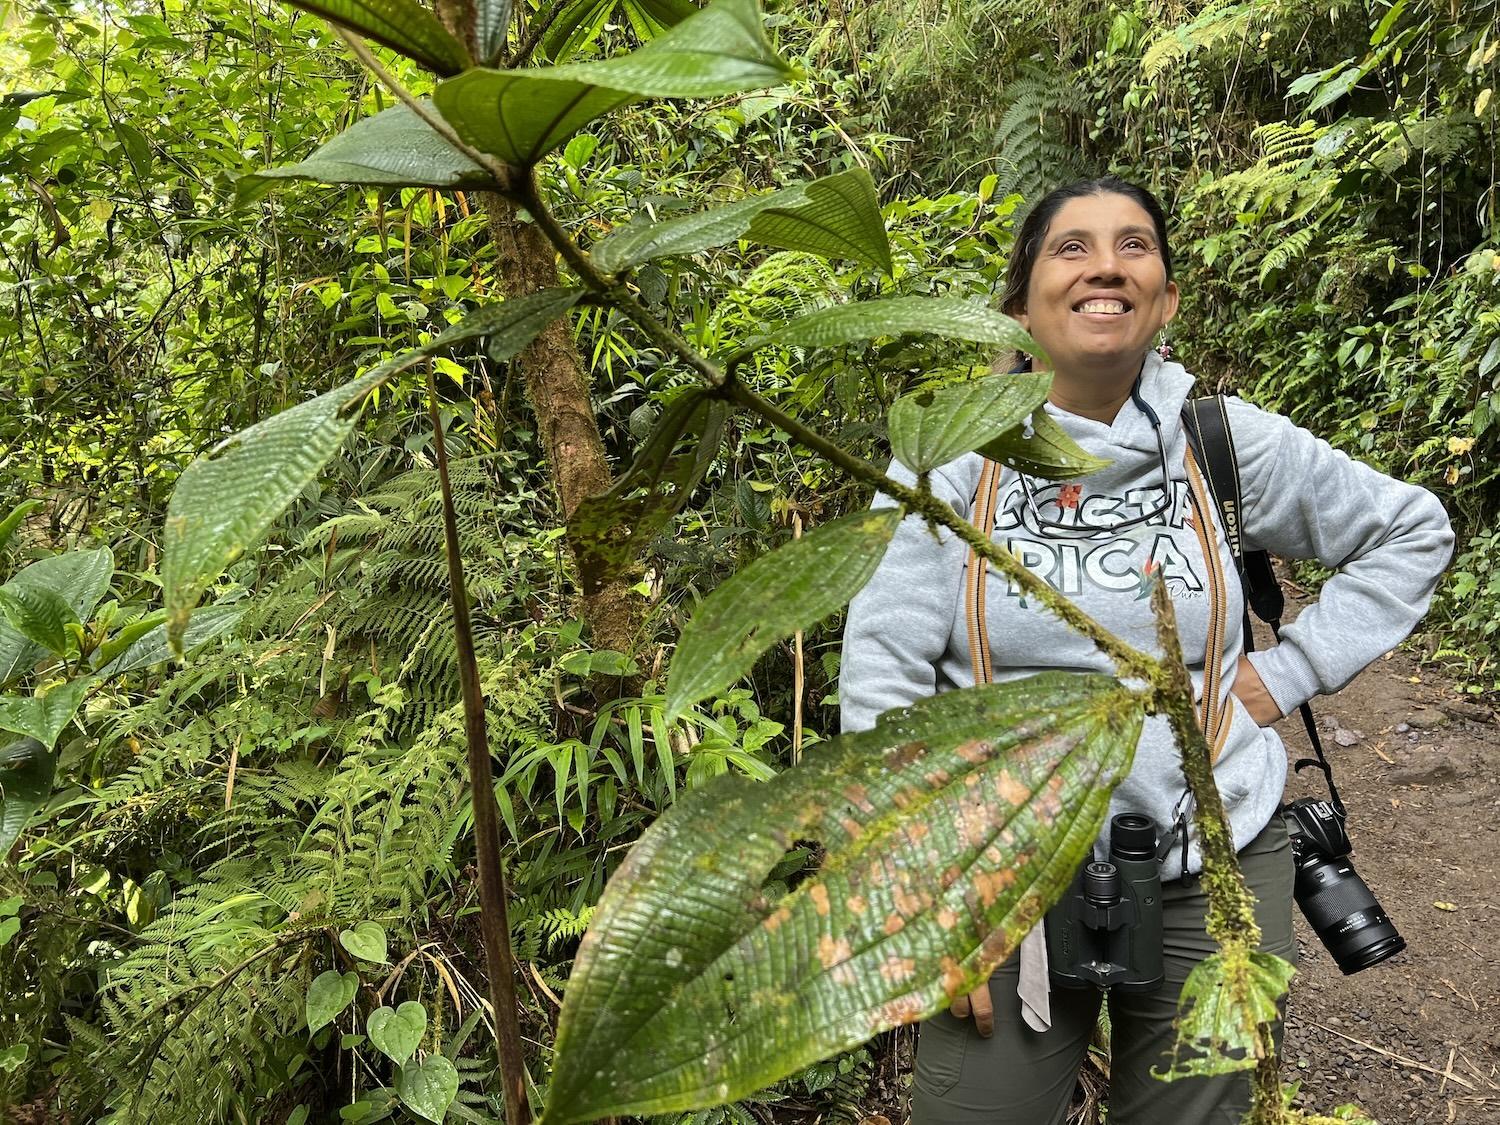 Costa Rican tour guide Monical Leal stands in the Santa Elena Cloud Forest Reserve.